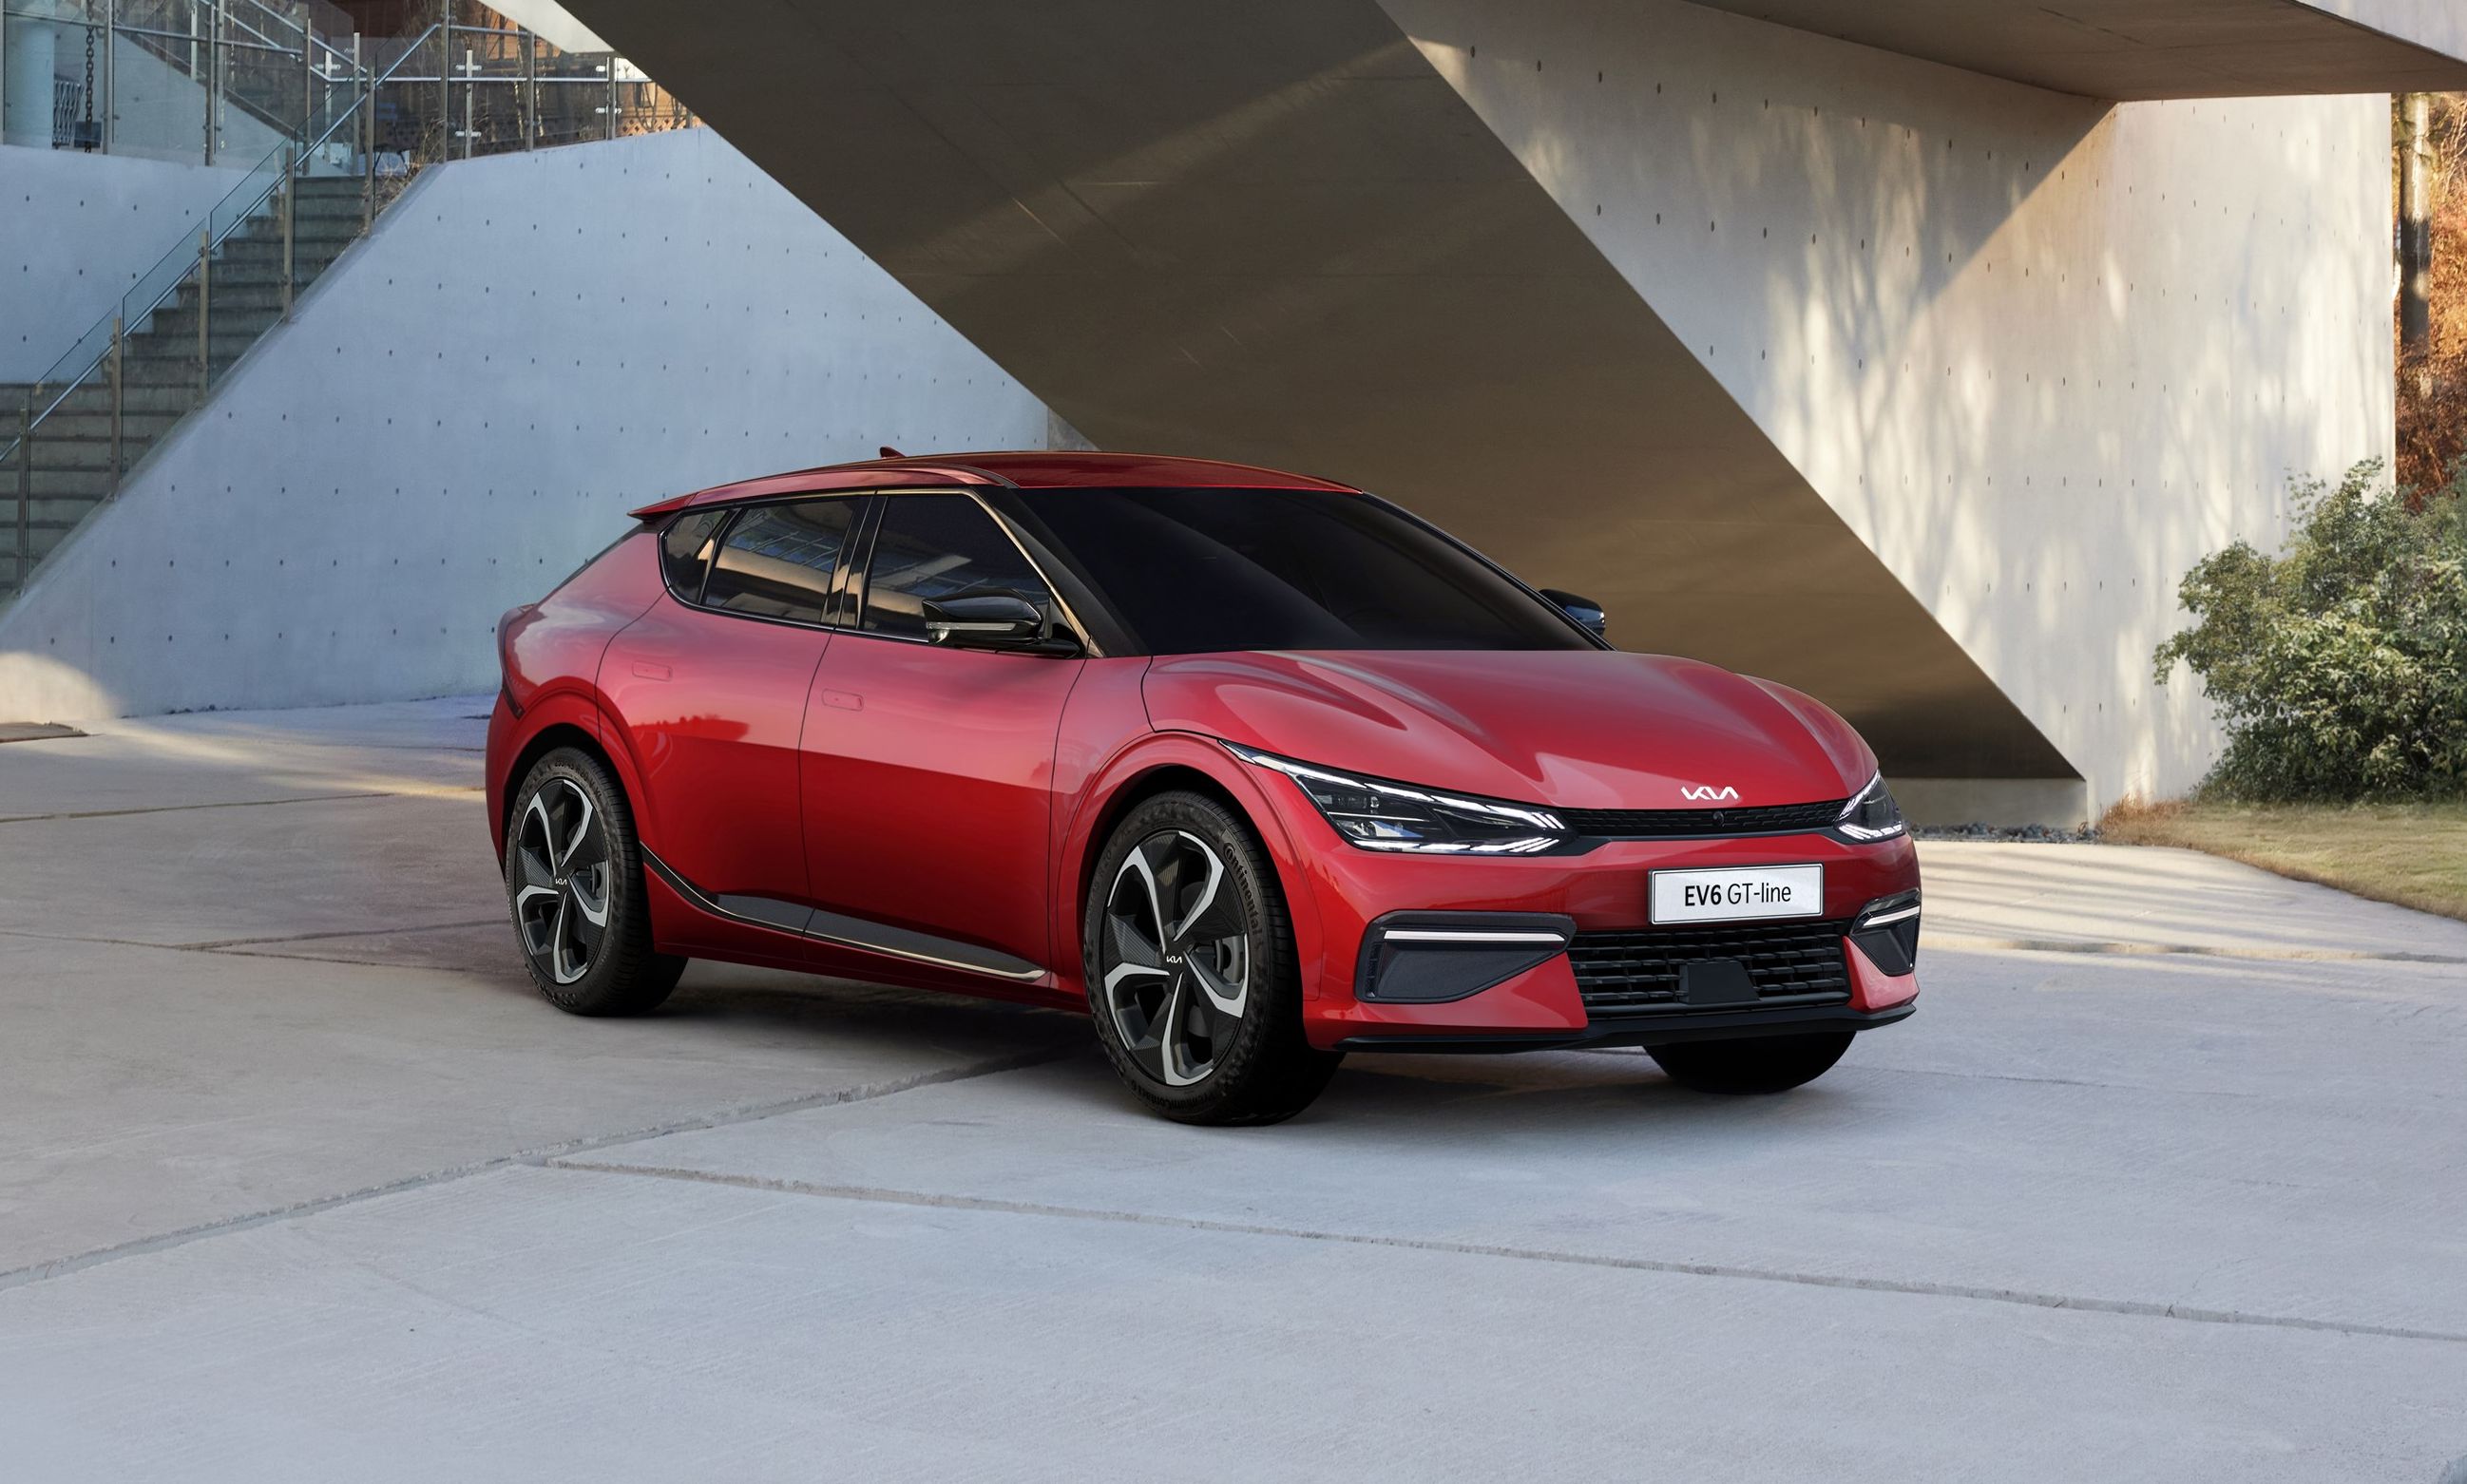 2021 The Kia EV6 Is A Formidable Rival To The Porsche Taycan, Too!